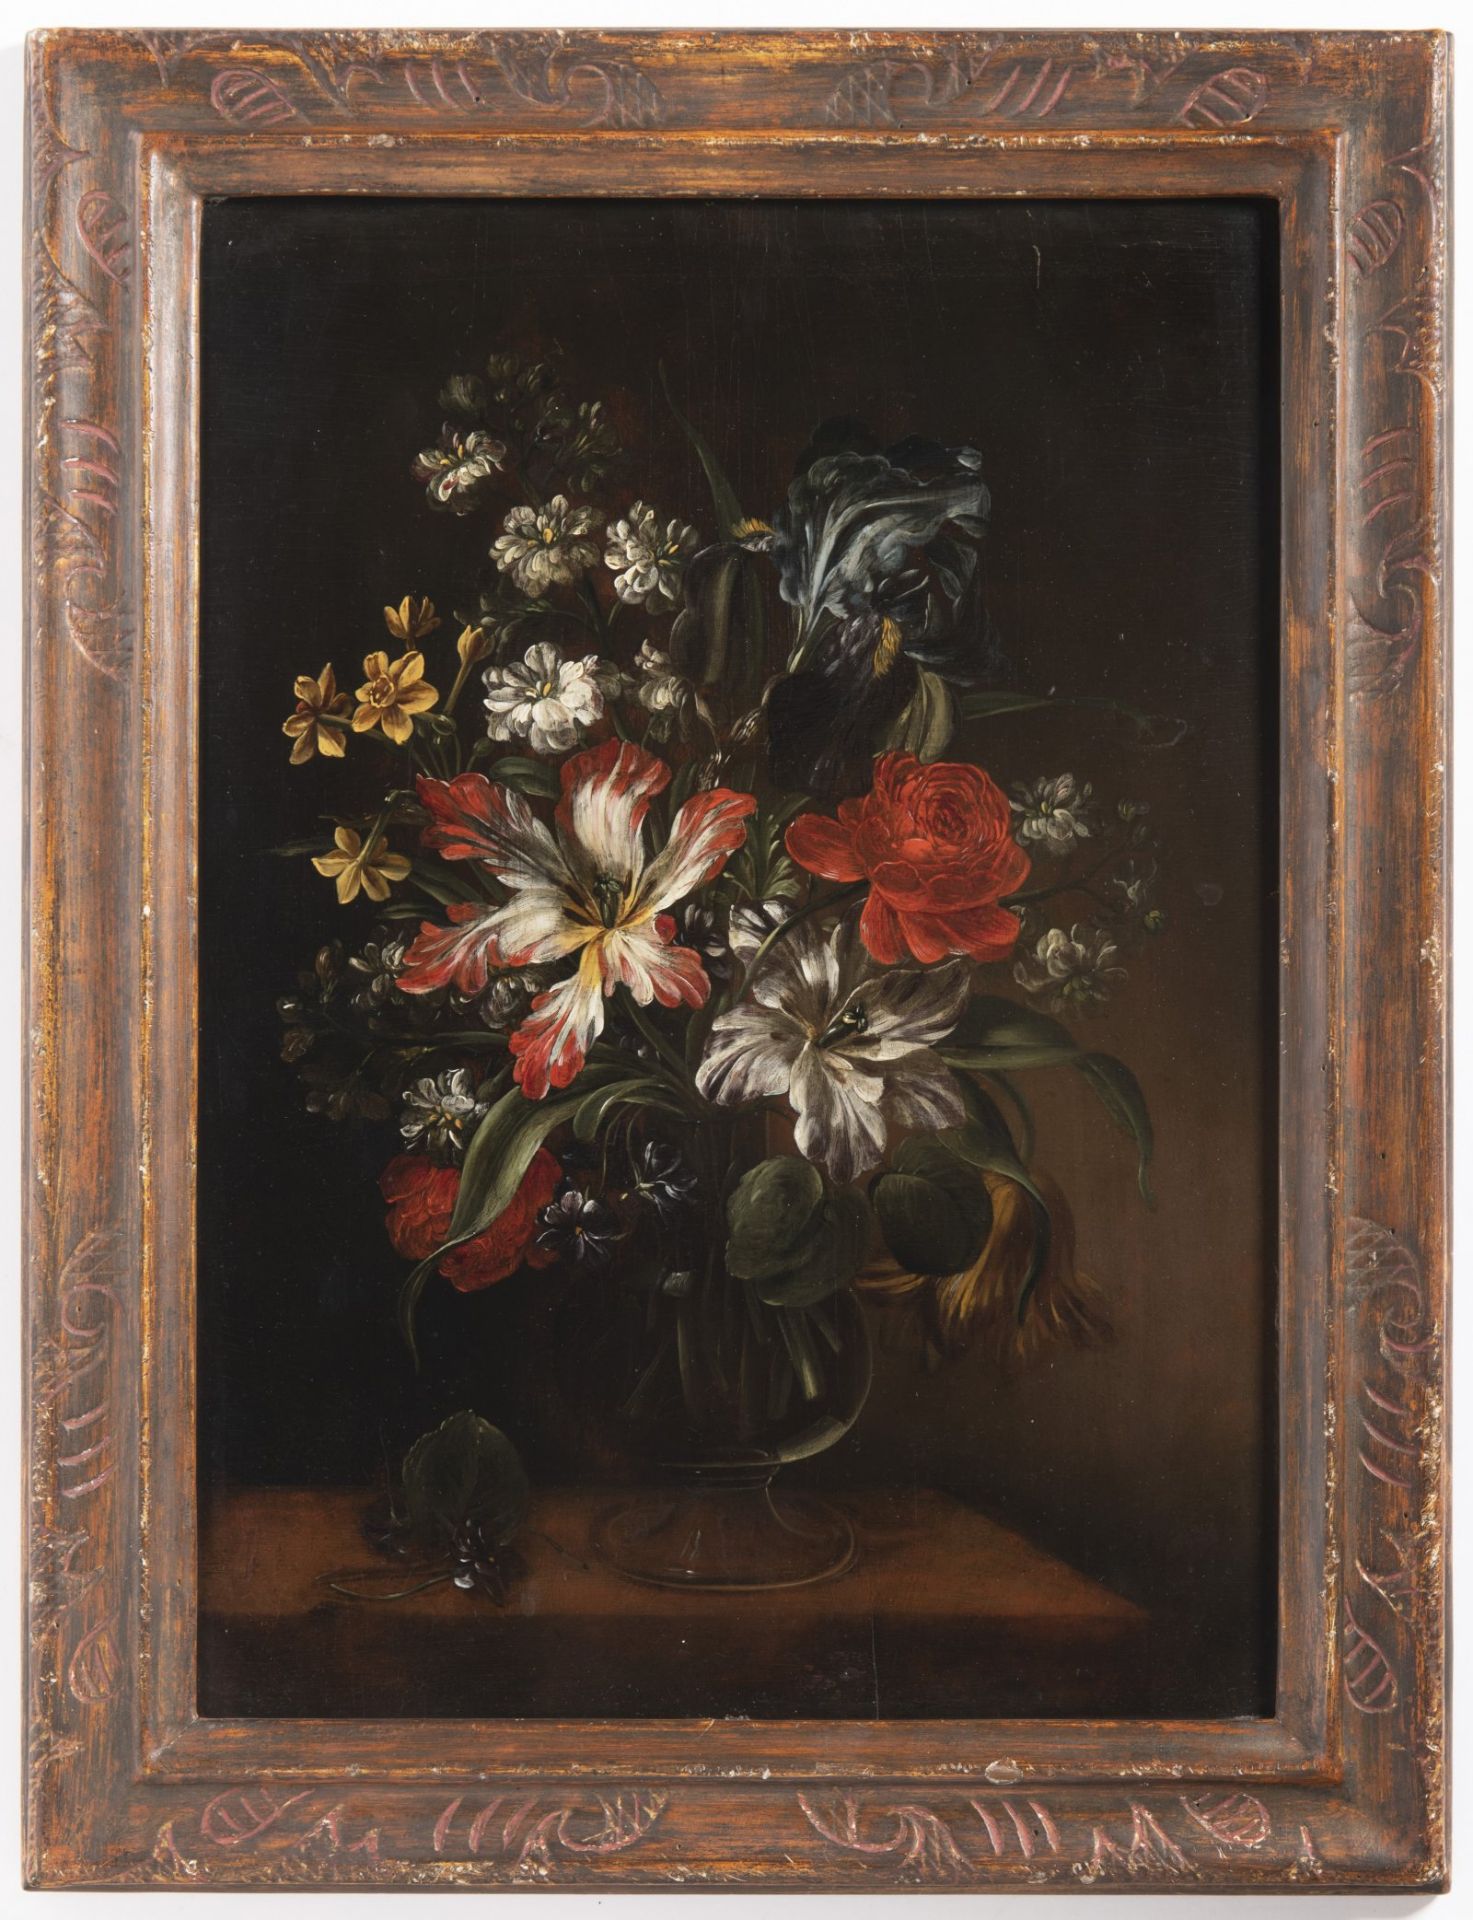 JAN KAŠPAR HIRSCHELY 1695 - 1743: PAIRED FLORAL STILL LIFES First half of 18th century Oil on wood - Image 3 of 4